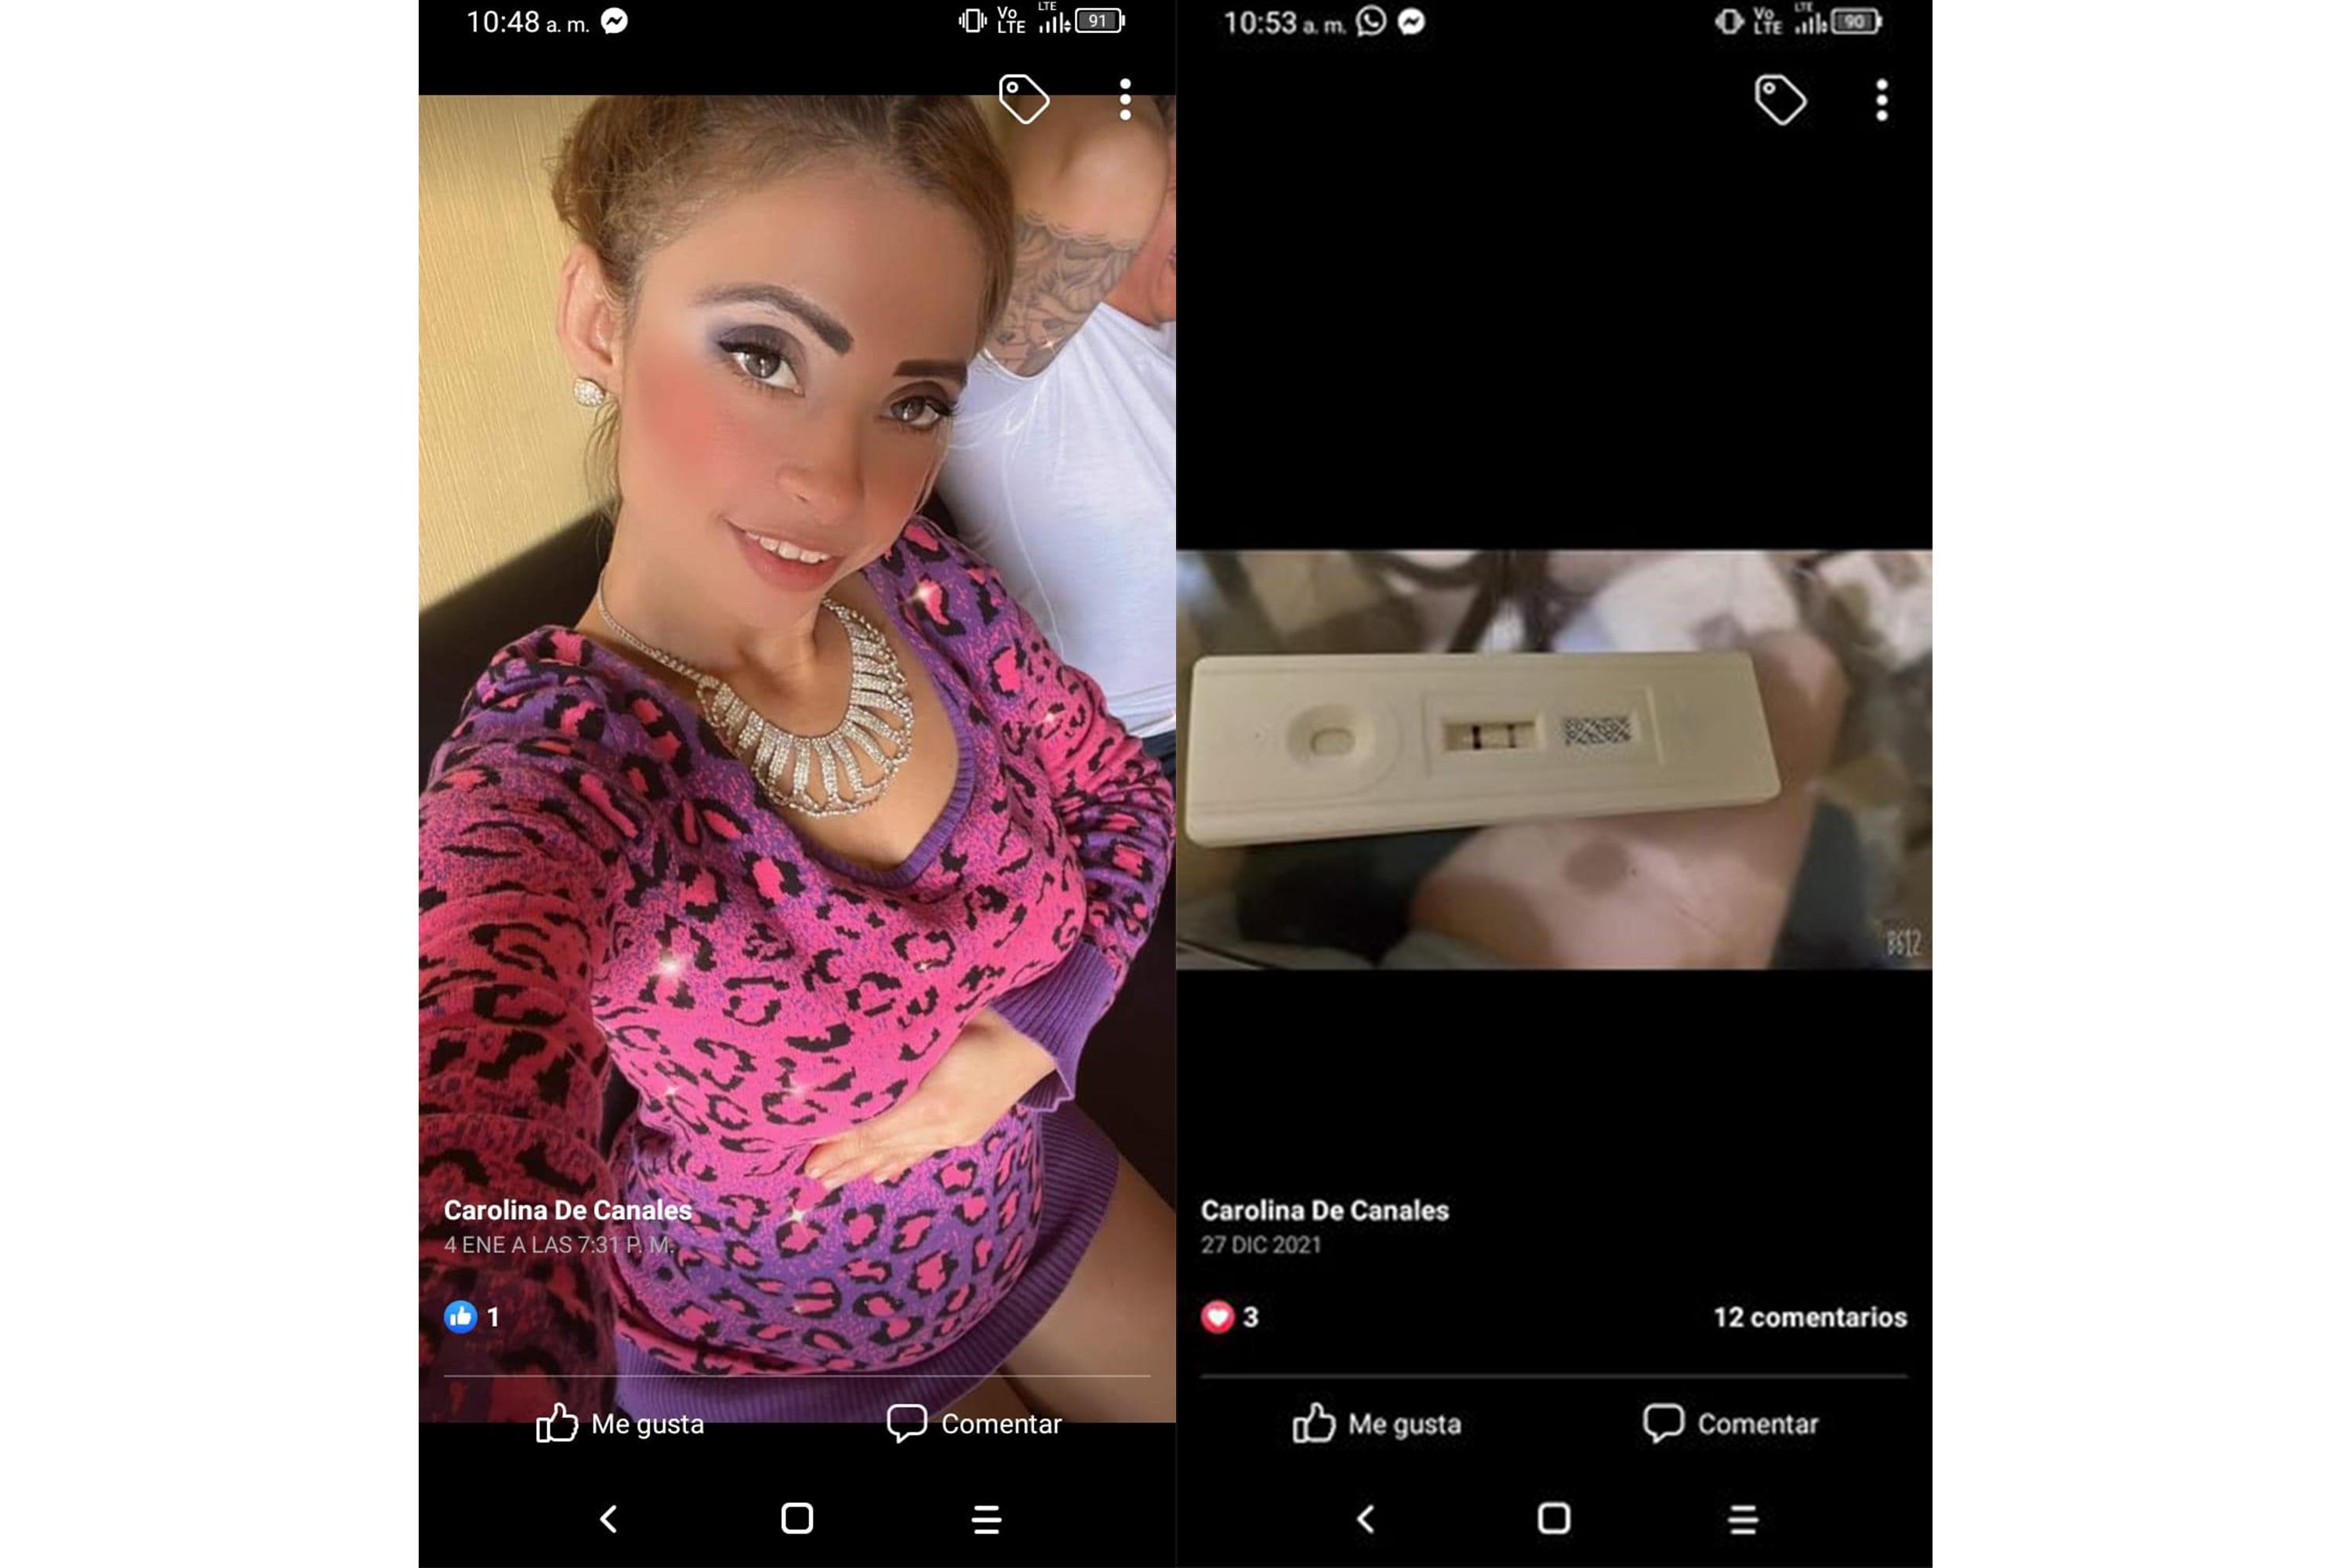 In December 2021 Chávez shared a positive pregnancy test on her Facebook page. Eight days later she posted a photo accentuating her stomach. Canales sits next to her, recognizable by the tattoos on his right arm.